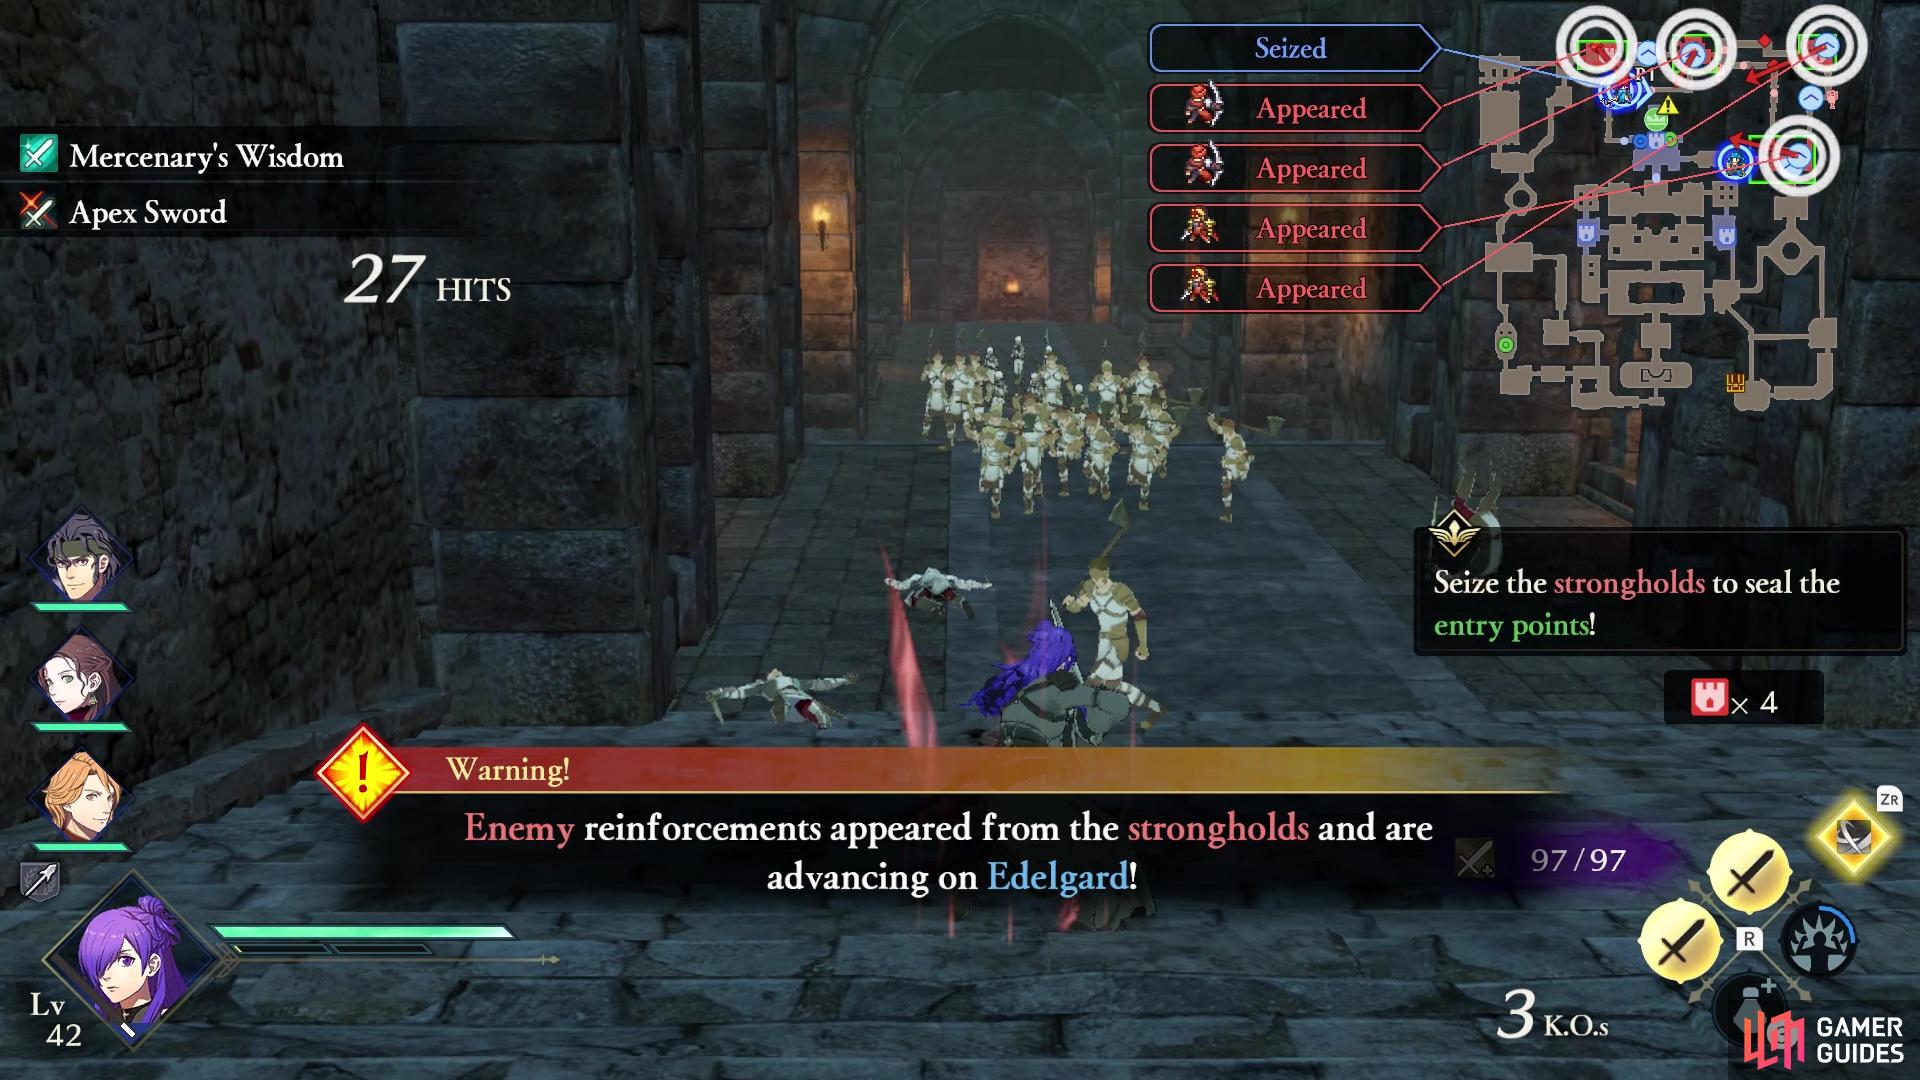 Some extra enemy units will appear to go after Edelgard